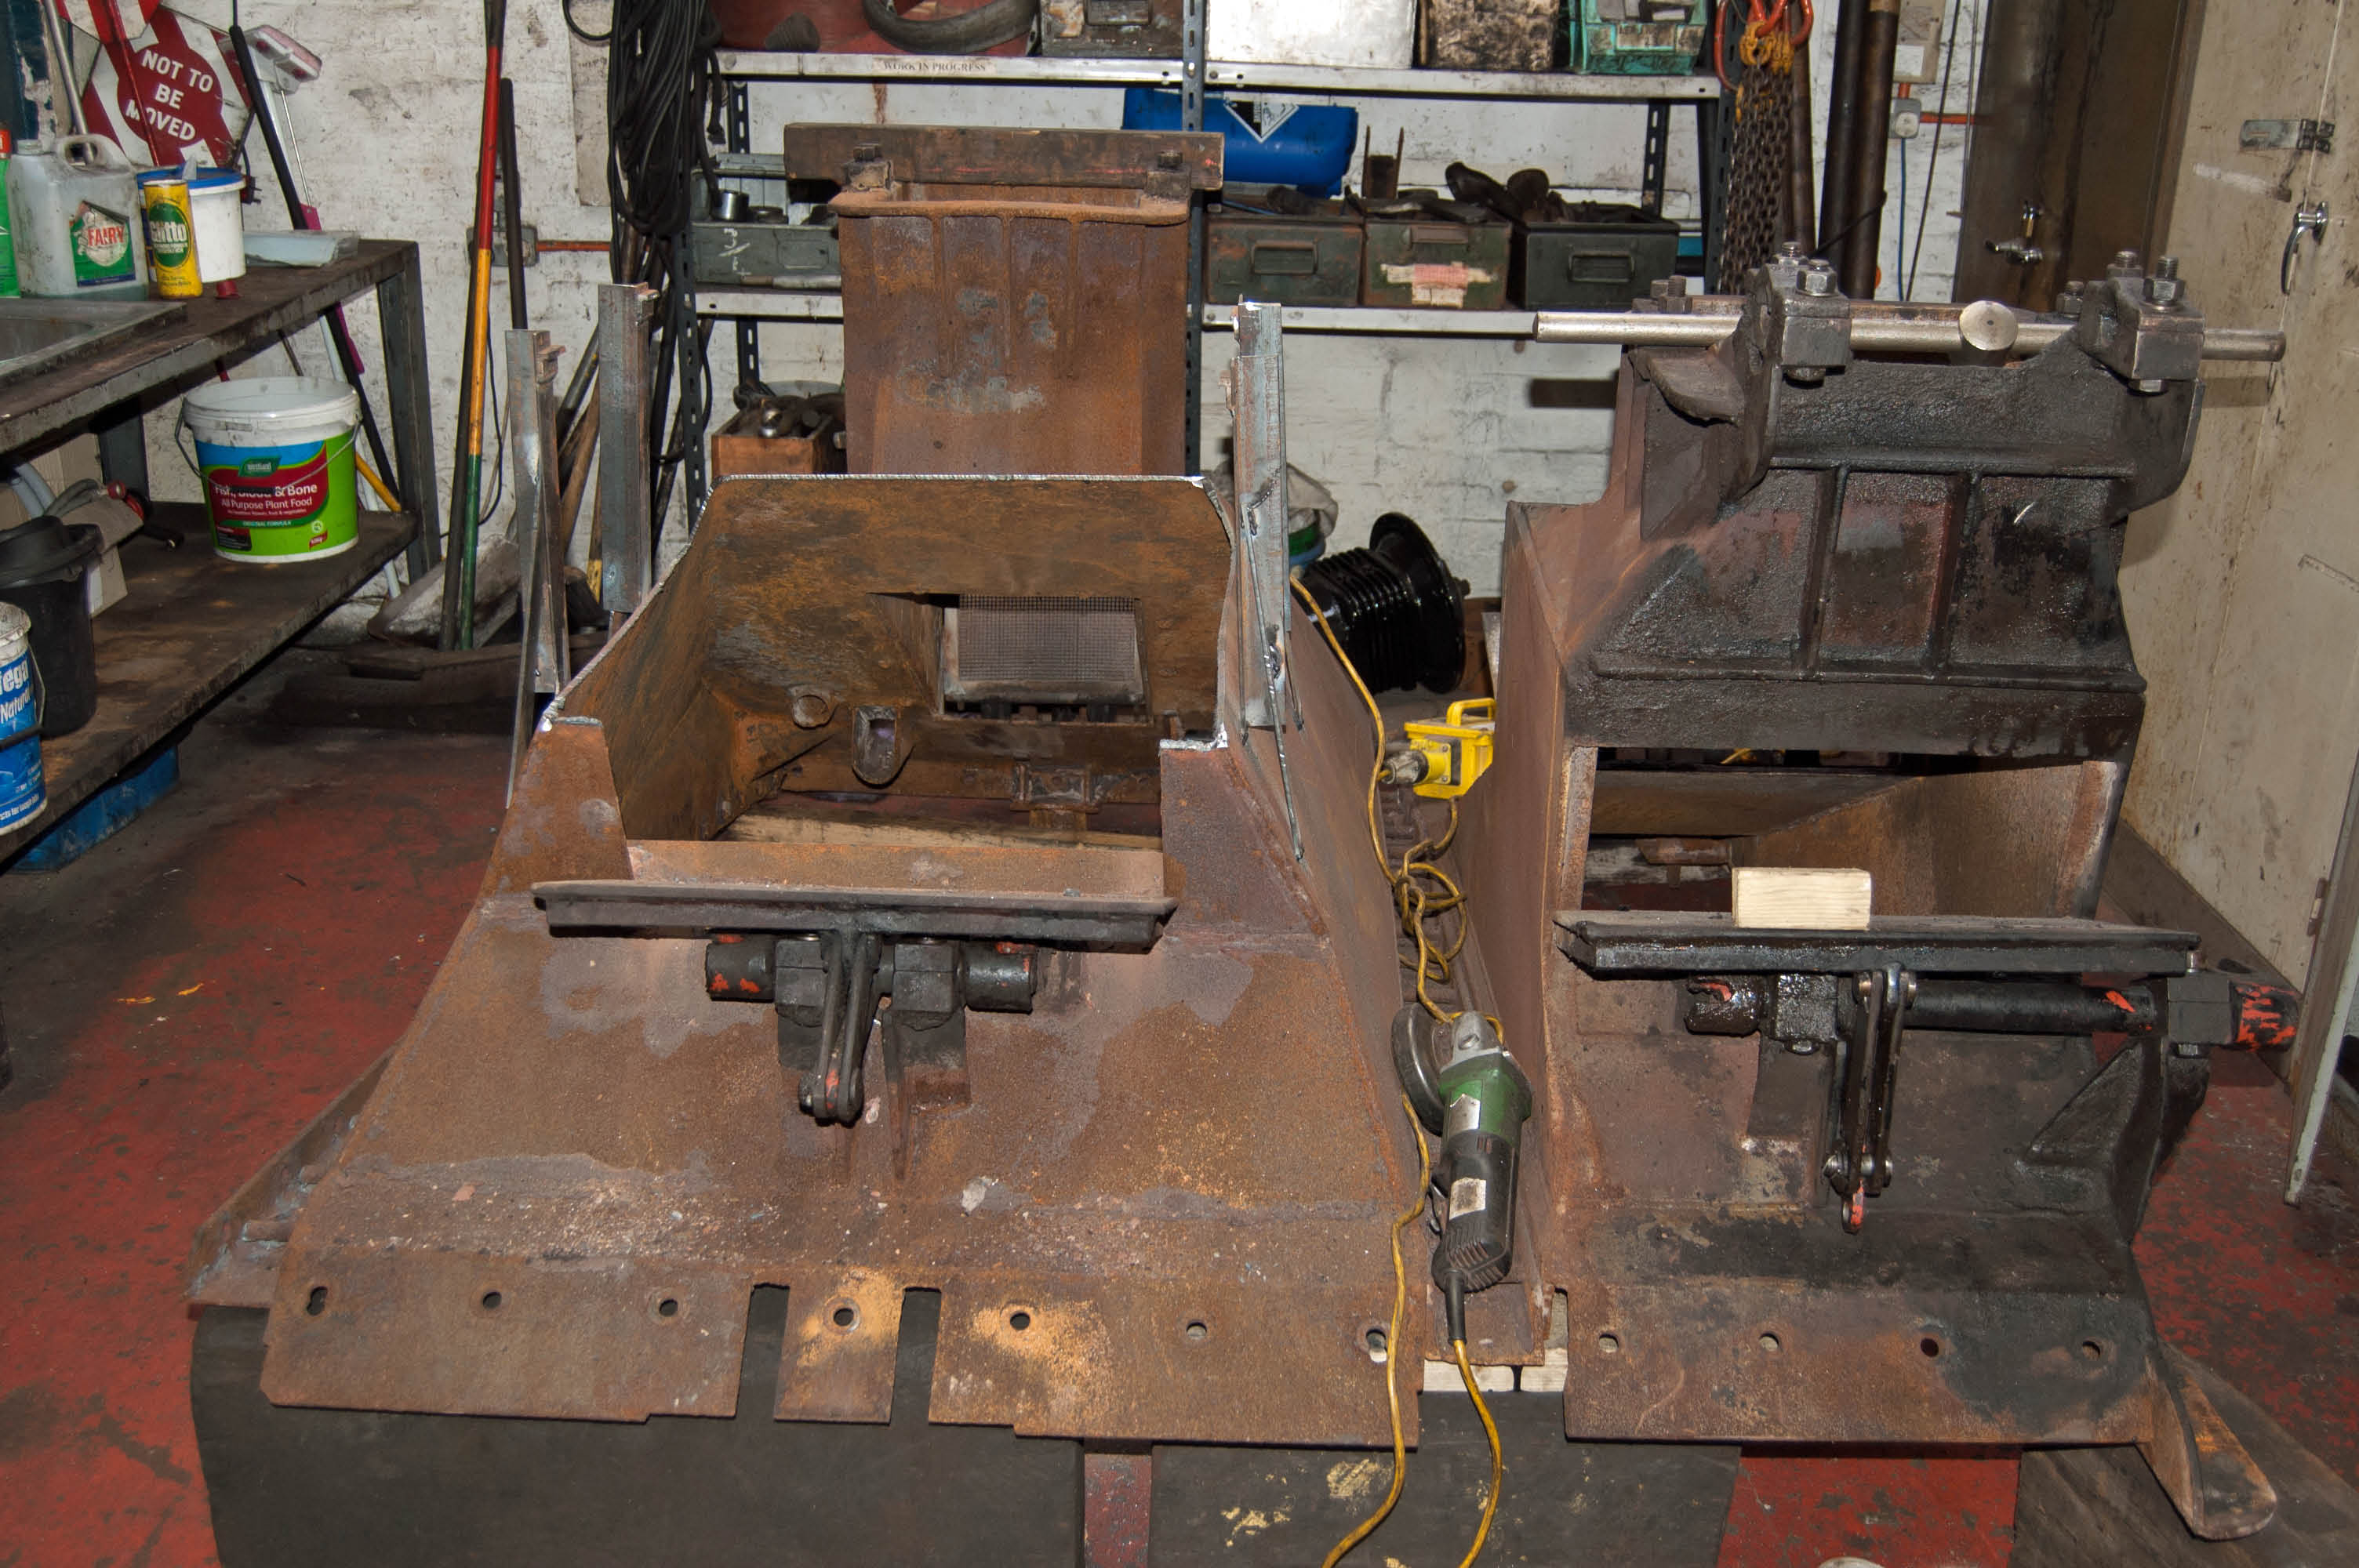 The ashpans have been removed, and partially dismantled, so that the damaged parts can be repaired or replaced.